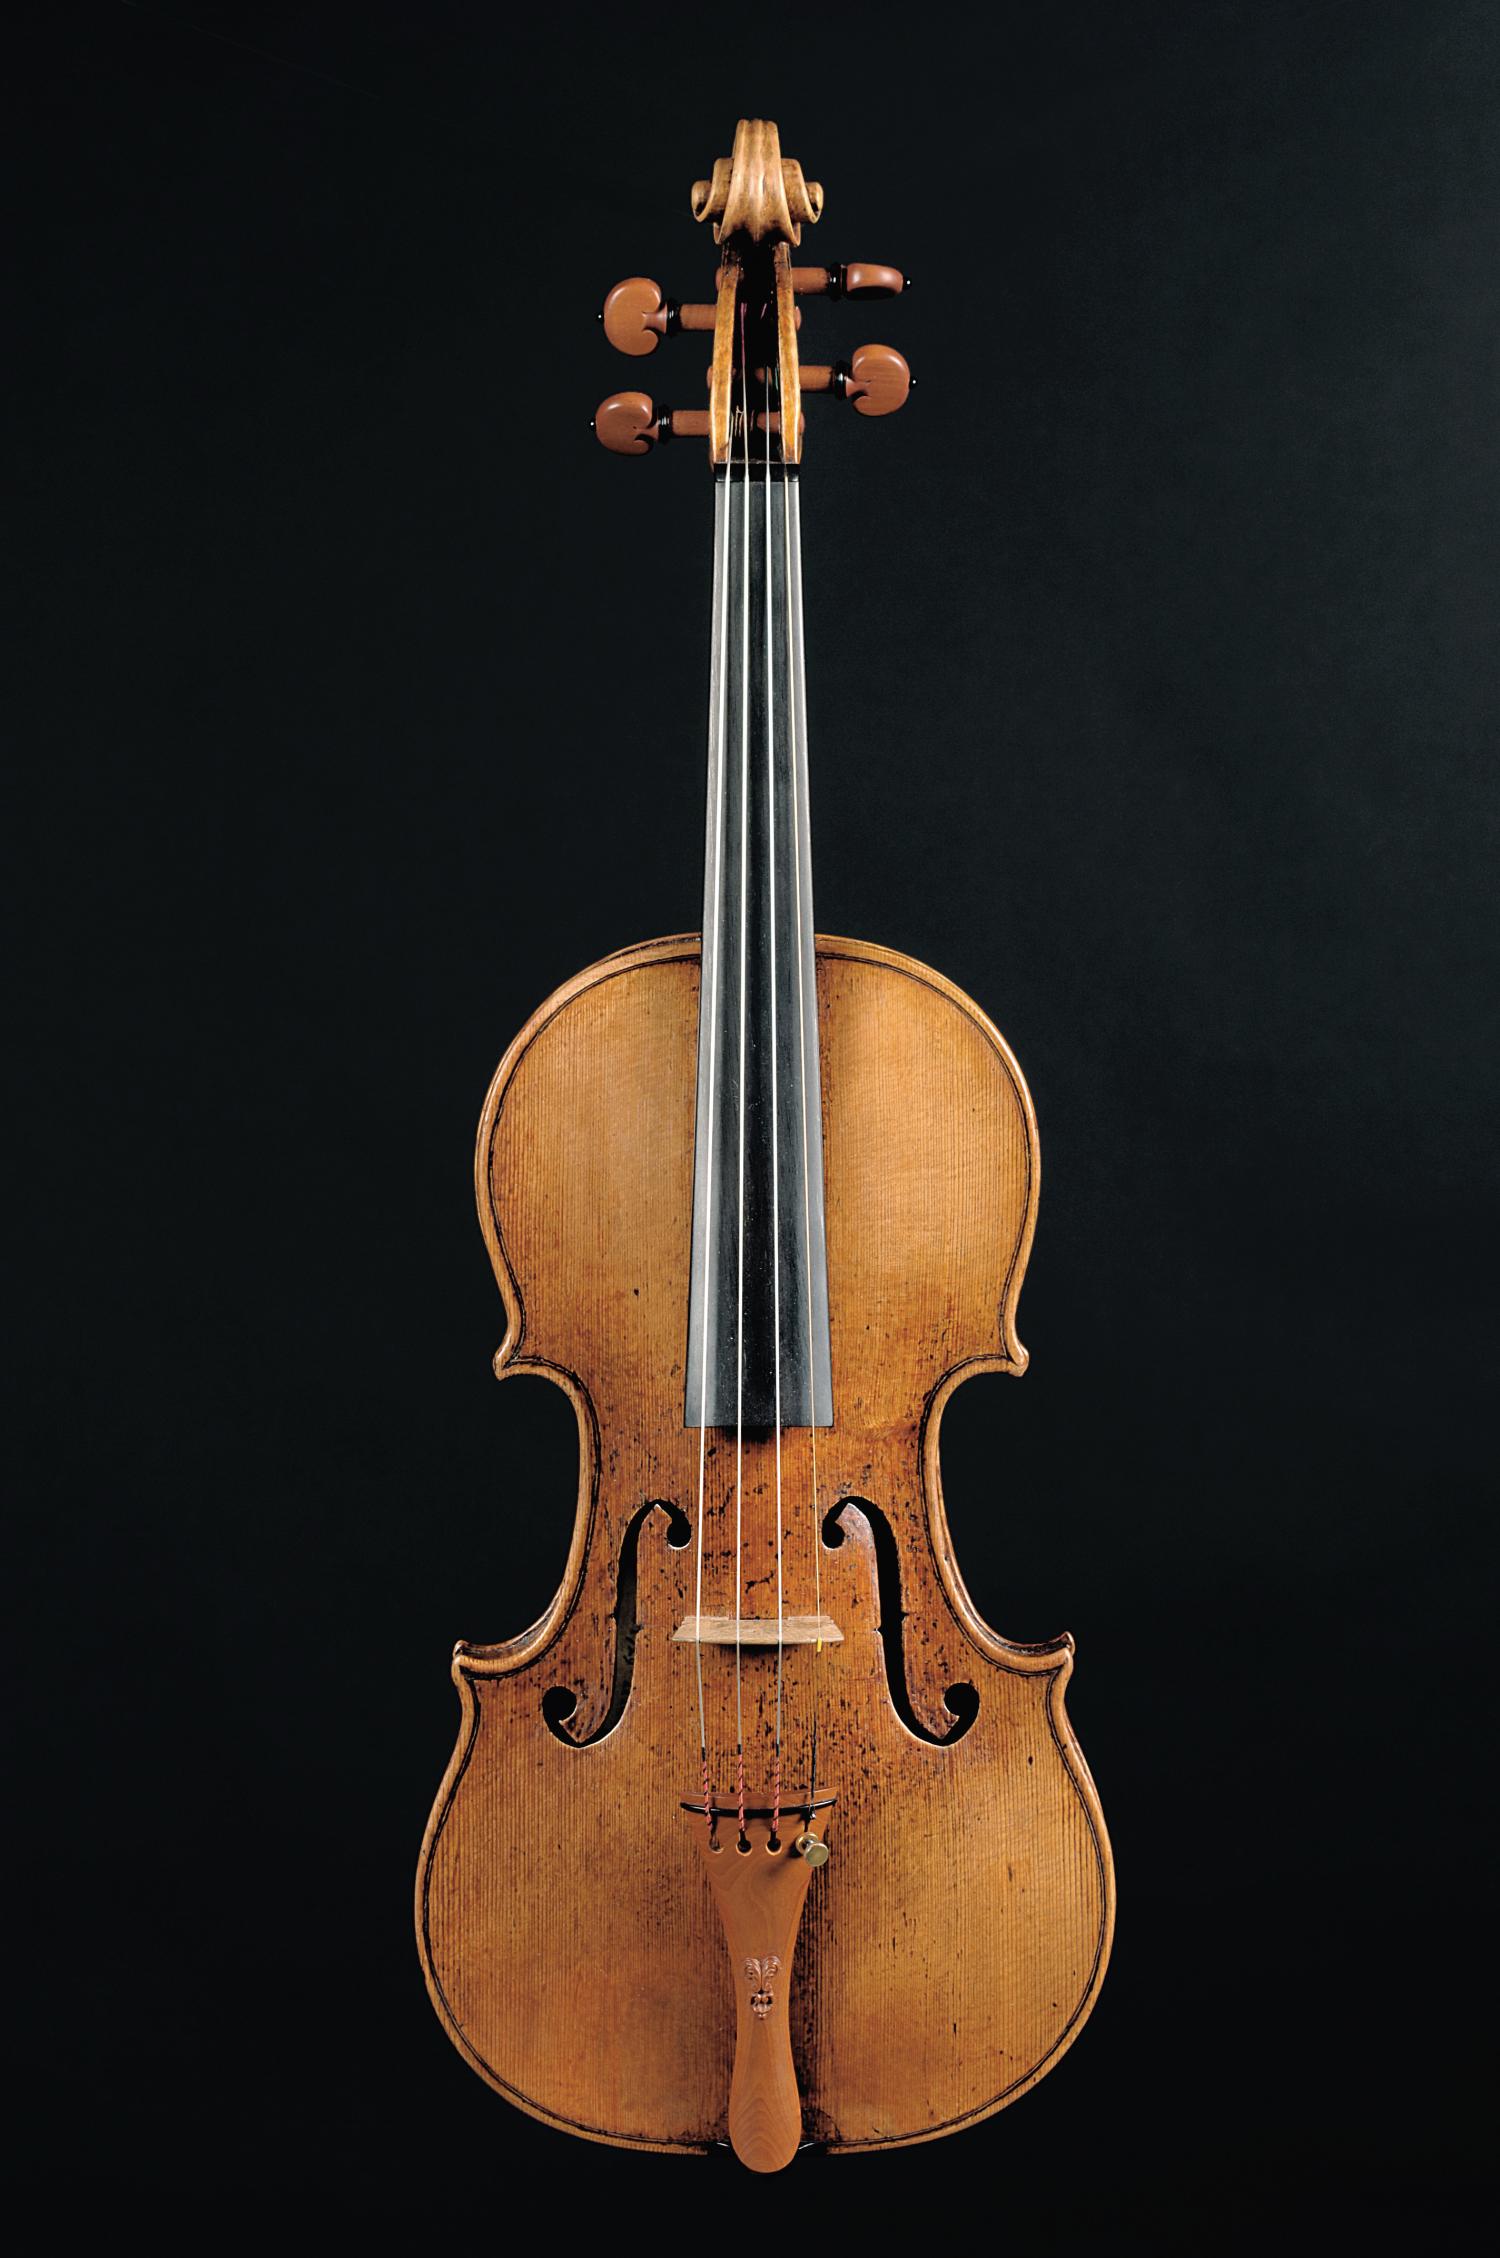 The components of violin varnish, Focus